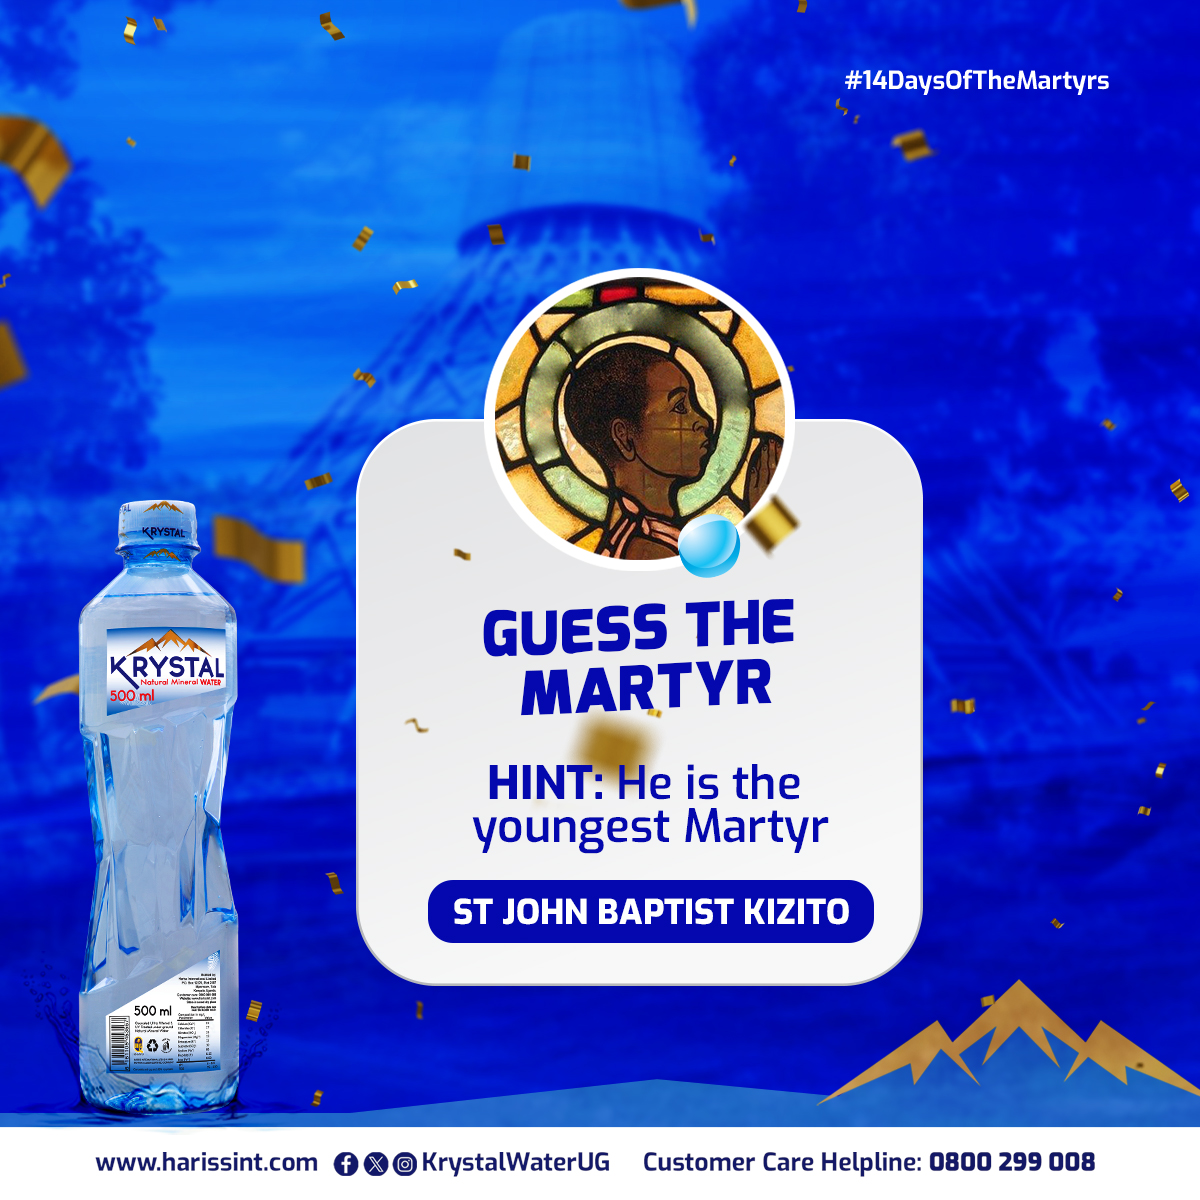 Congratulations, @Ebonggerald12! 🎉🎊 You are today's winner of the martyrs' trivia. Don't miss our trivia tomorrow for a chance to be the next lucky winner! #14DaysOfTheMartyrs #UgandaMartyrs